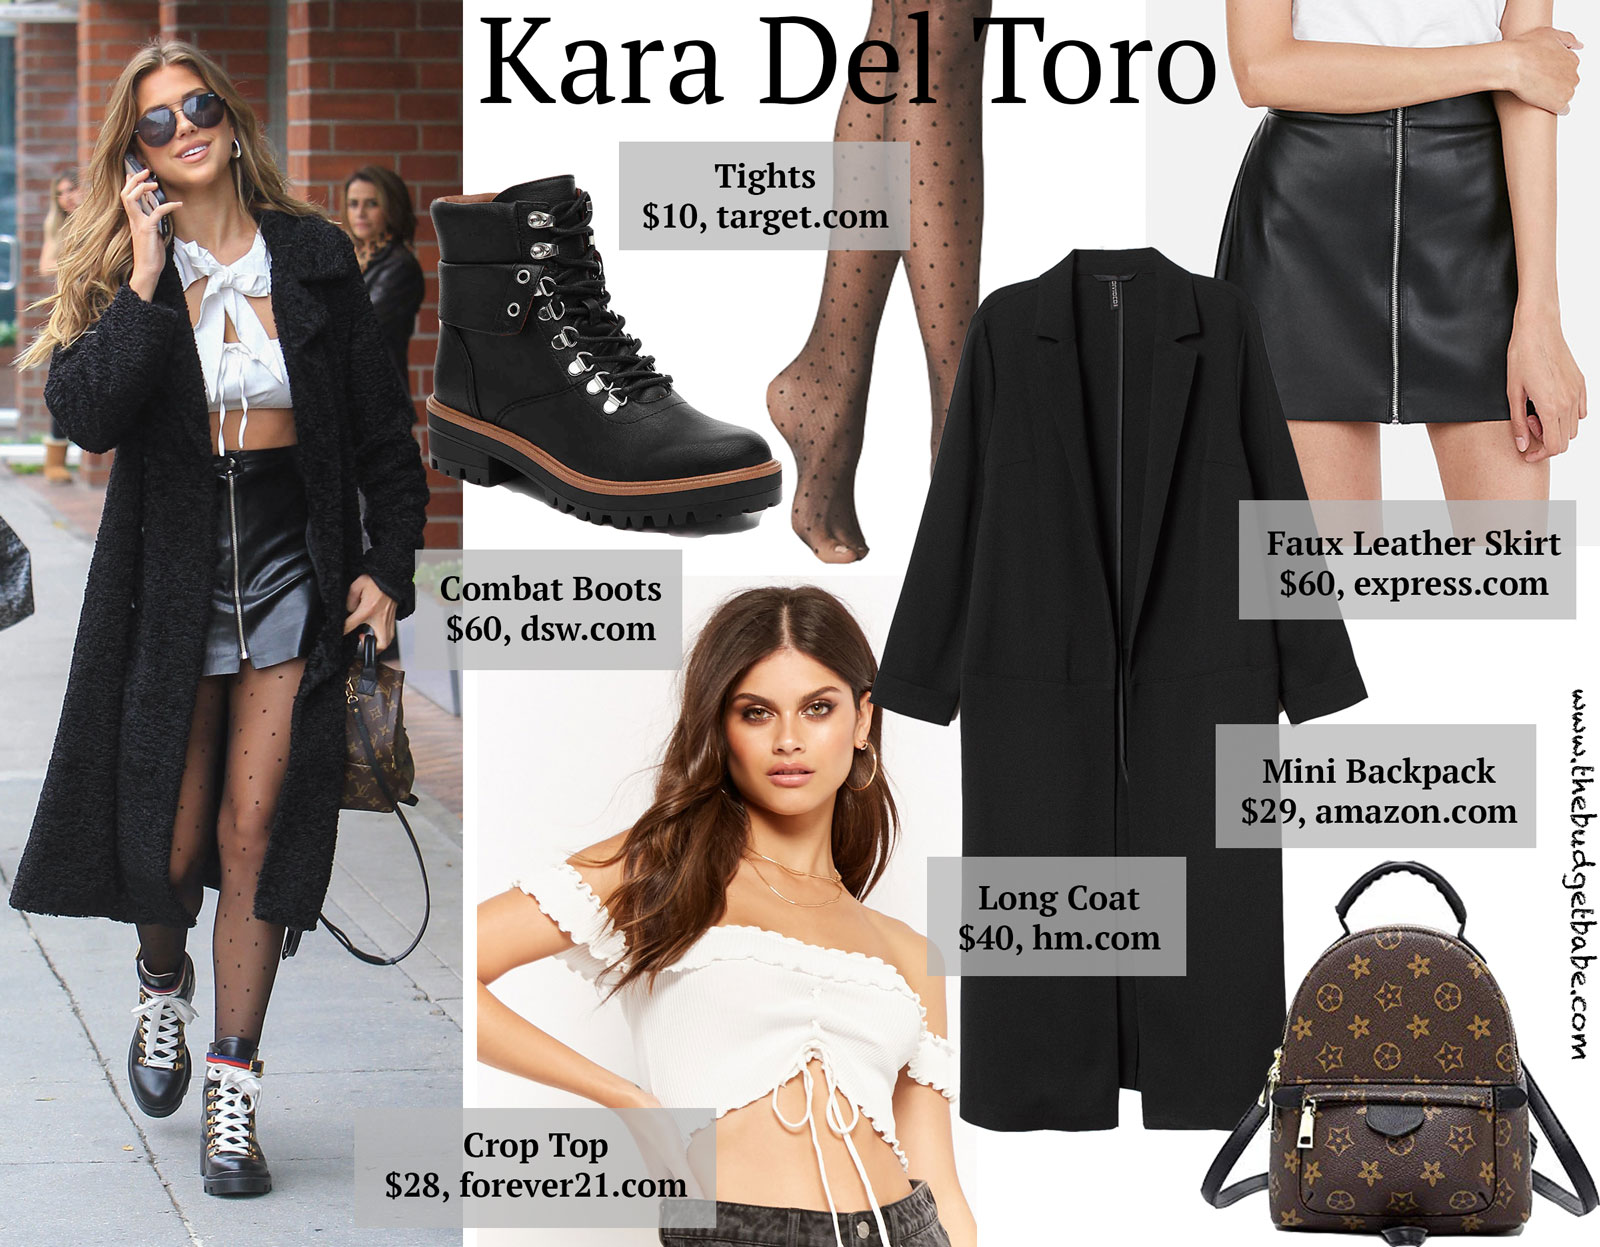 Kara Del Toro Gucci Boots and White Crop Top Look for Less